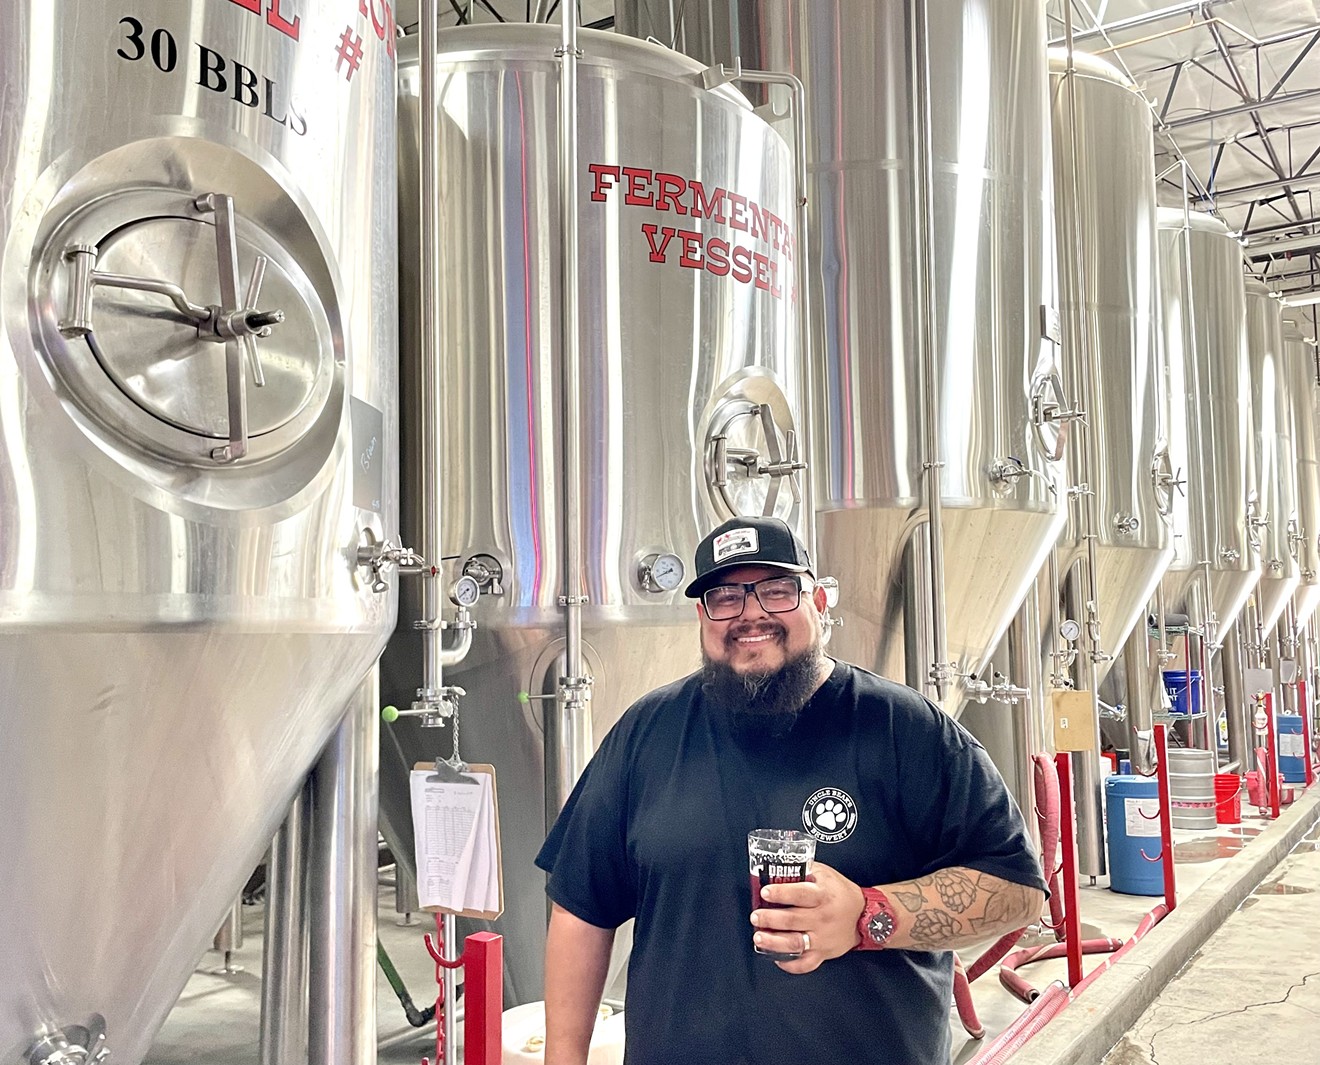 Brewers like Drew Ortega, head brewer of Uncle Bear's Brewery, are seeing growing interest in lagers, particularly Mexican-style lagers, among craft beer drinkers.